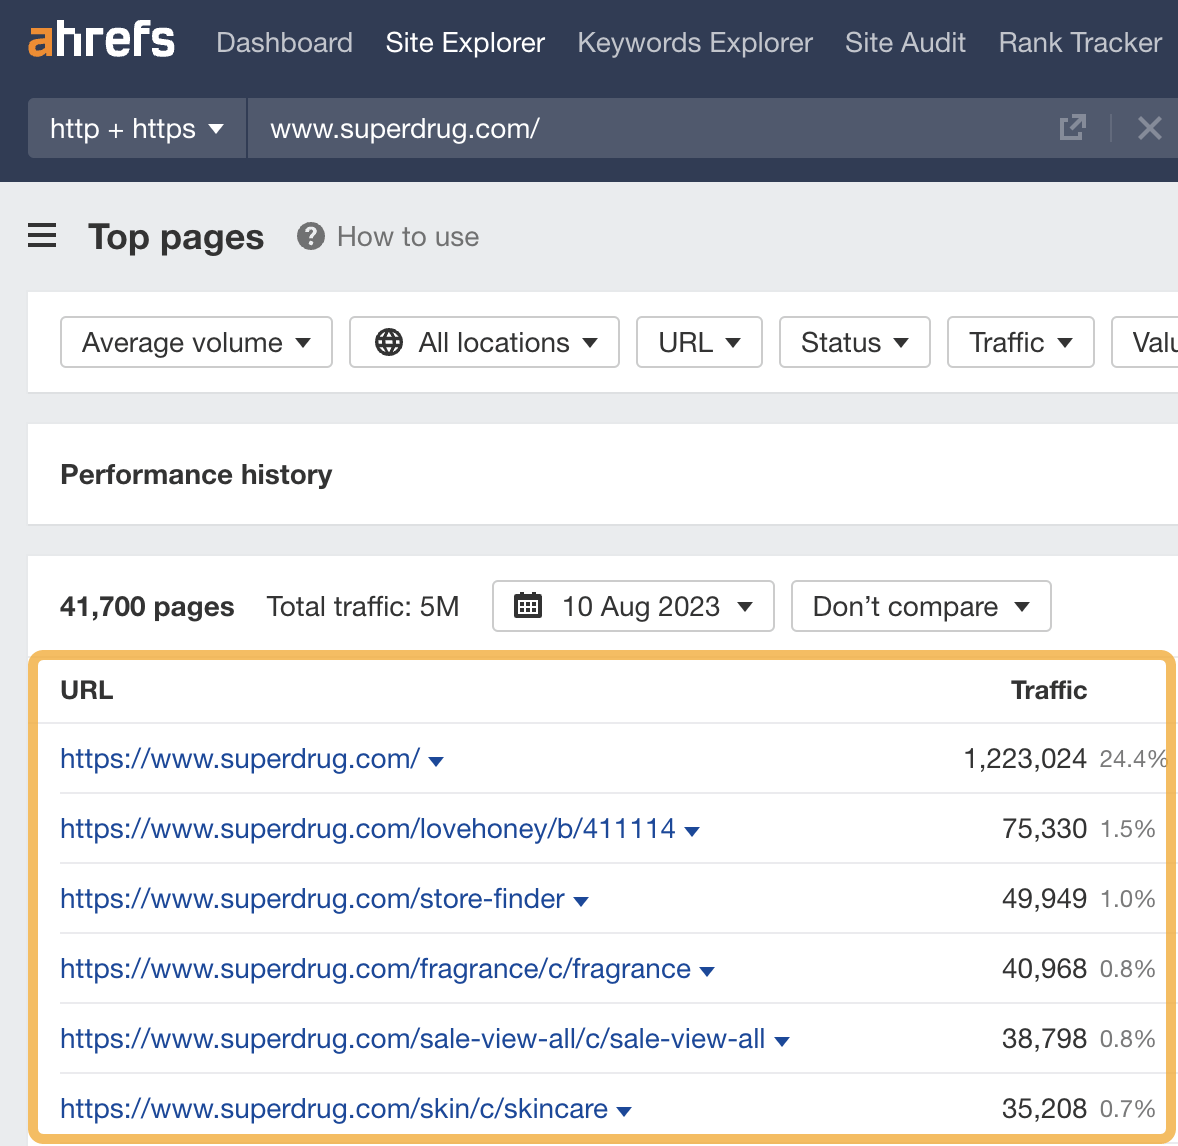 Top pages by estimated search traffic in Ahrefs' Site Audit. It might be worth optimizing the title tags for these pages